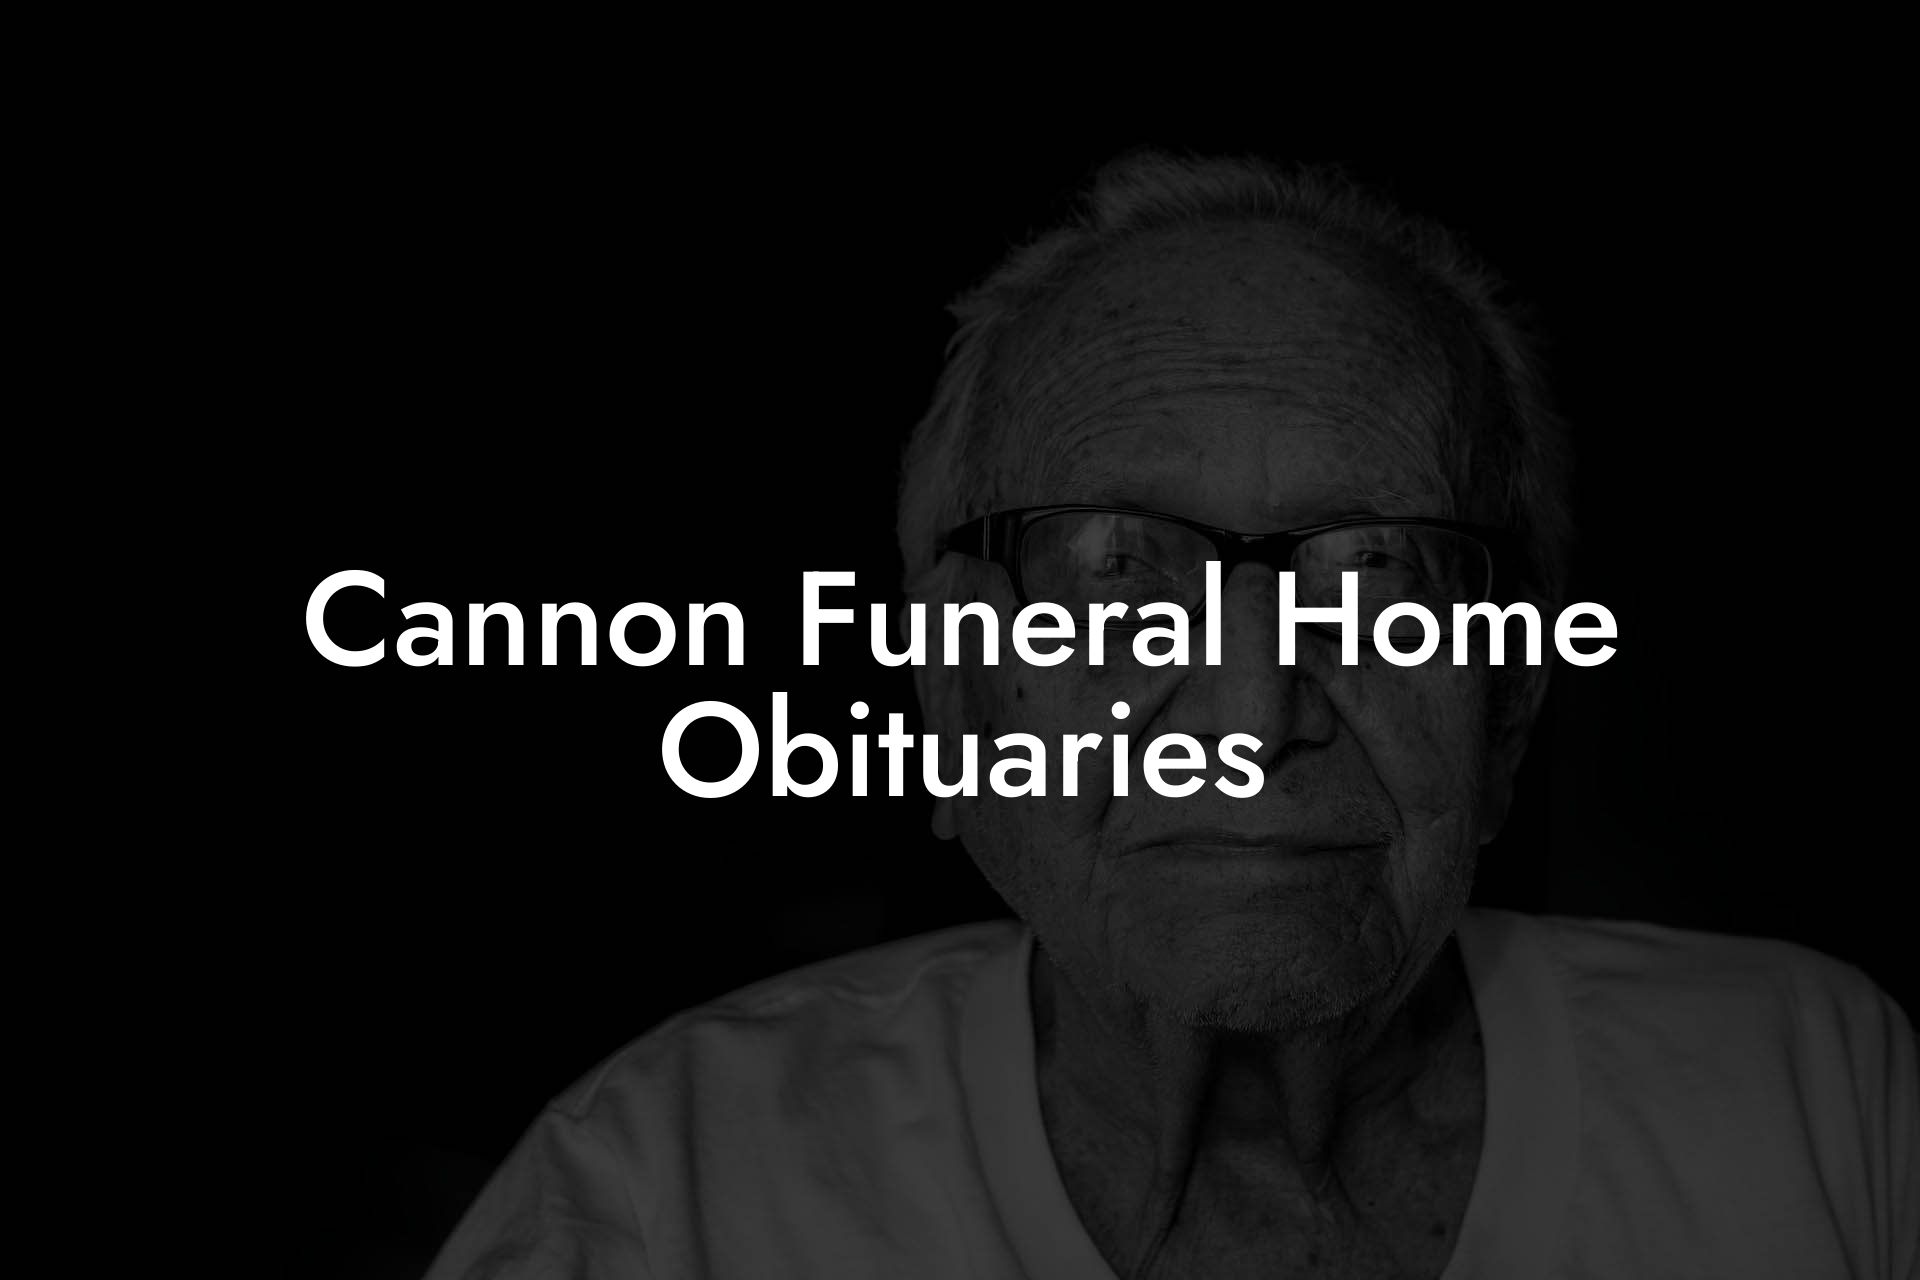 Cannon Funeral Home Obituaries